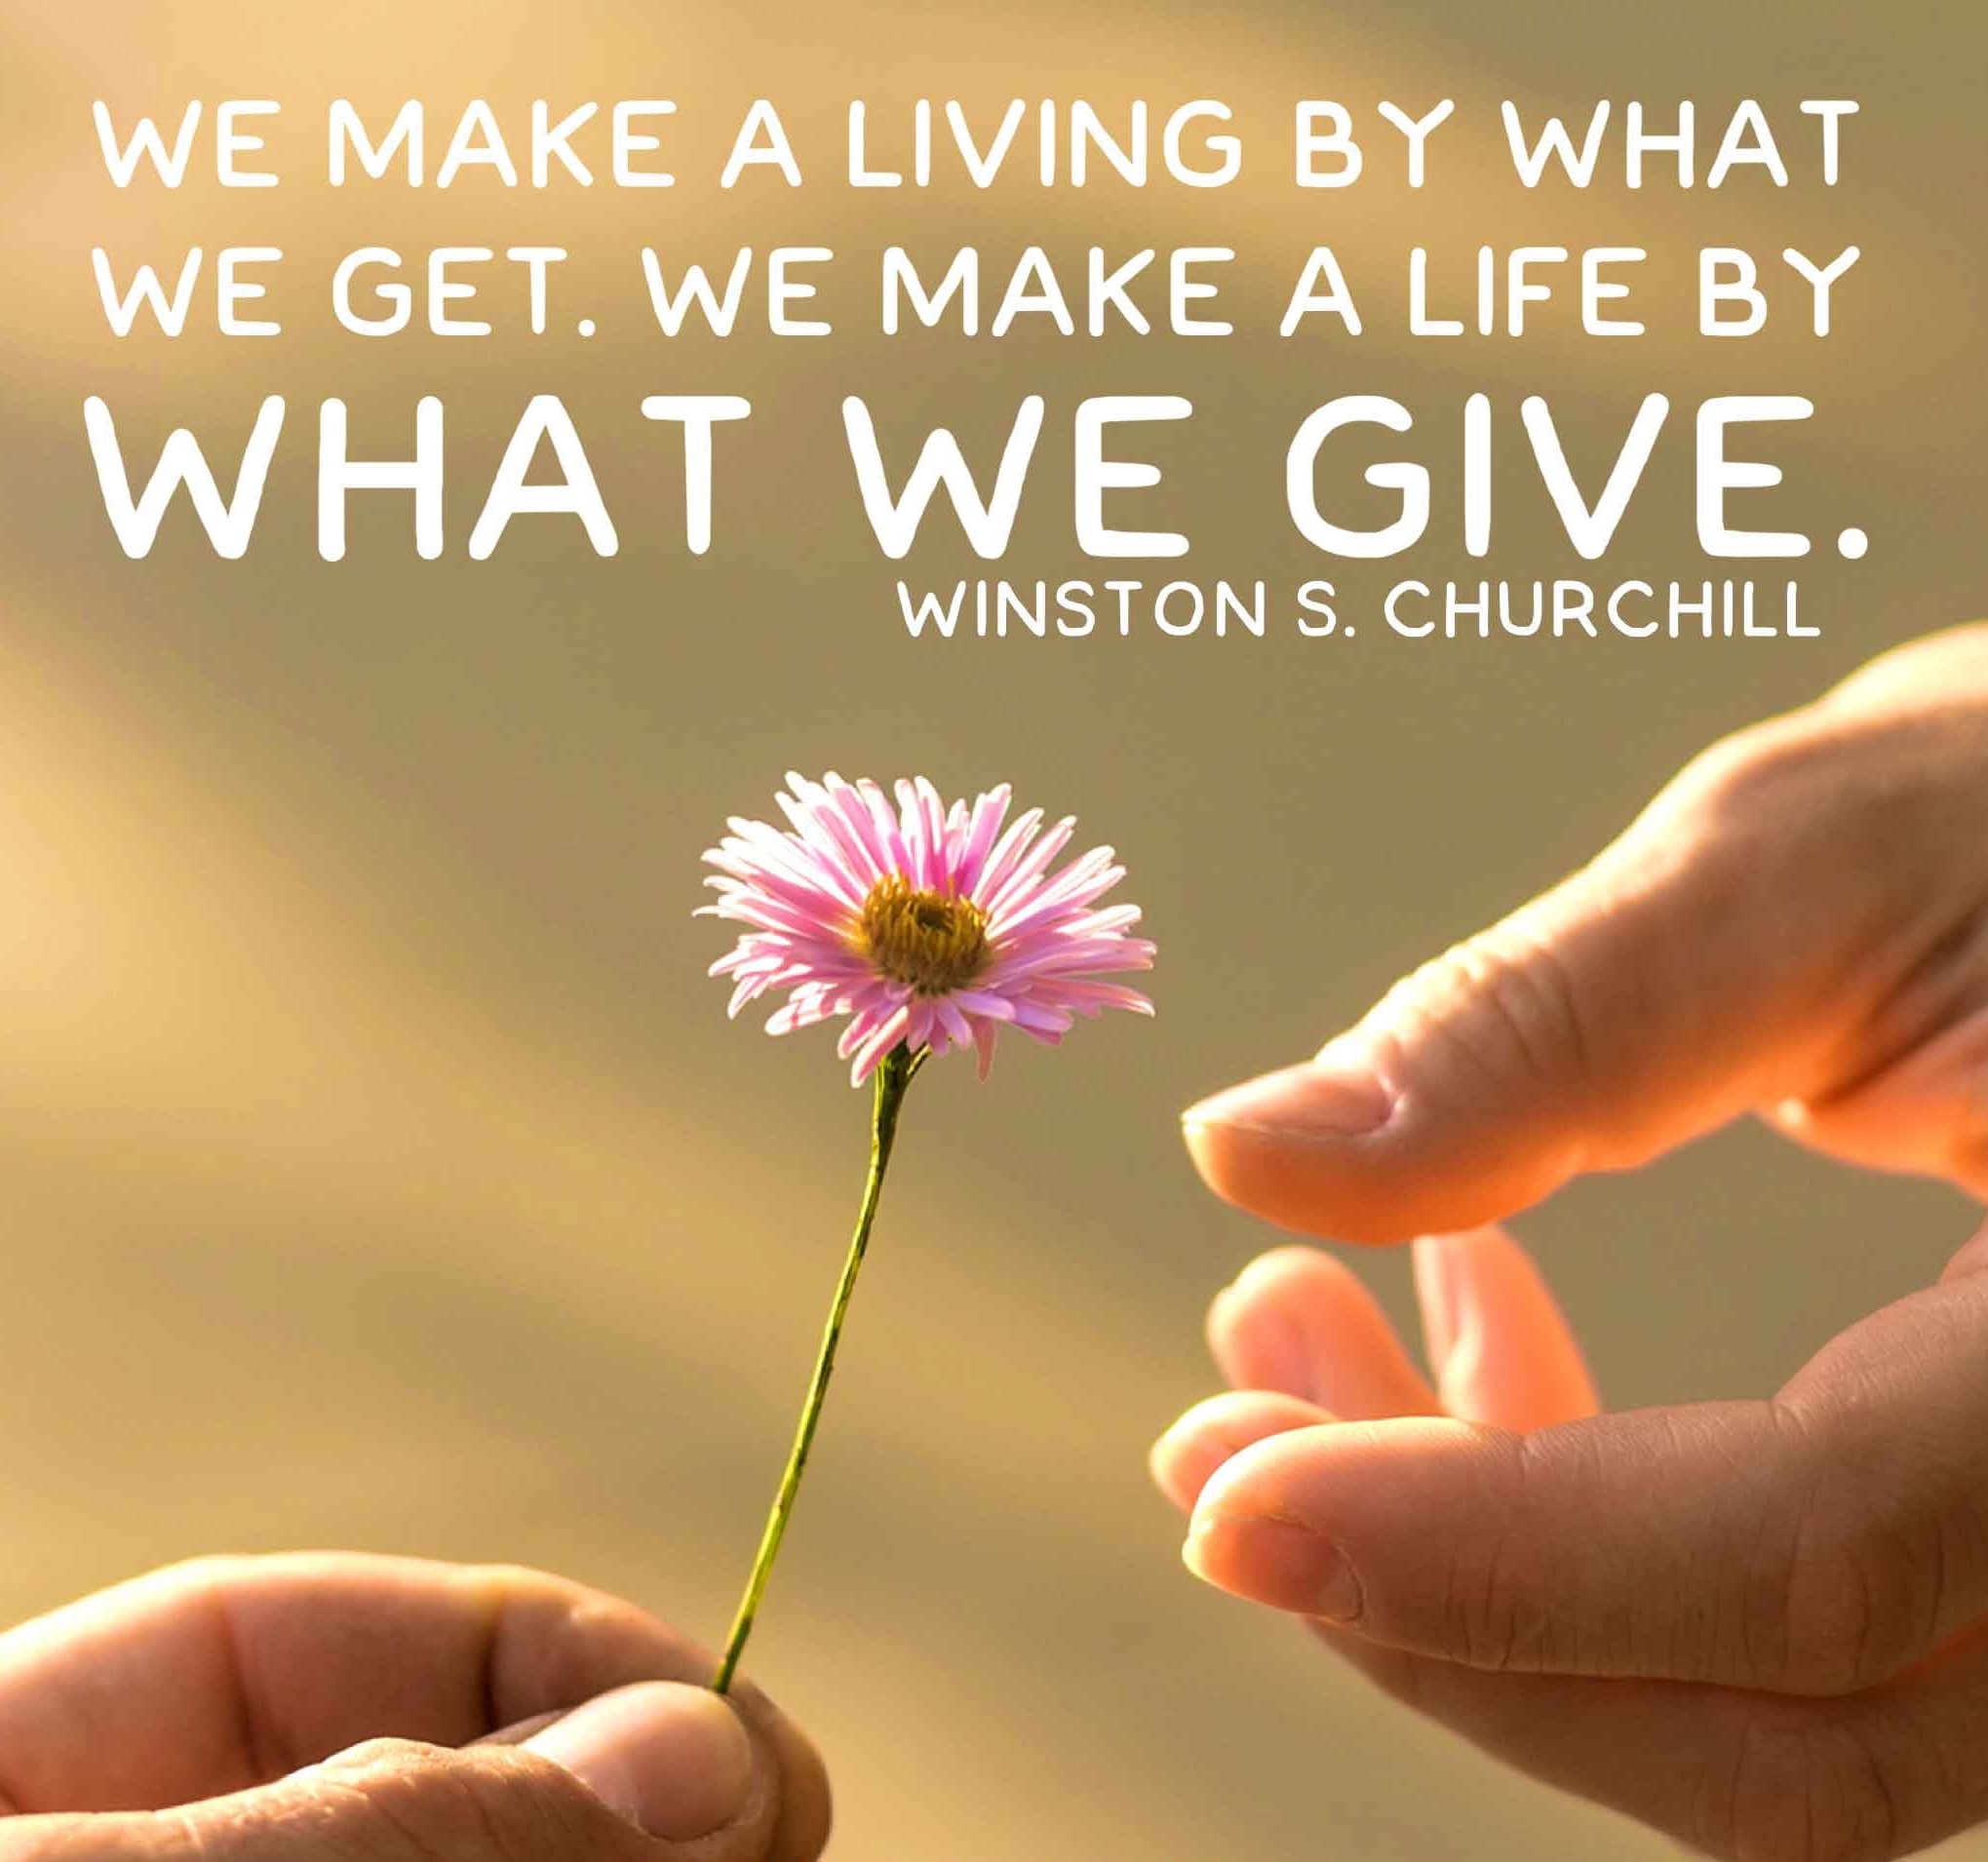 What we give